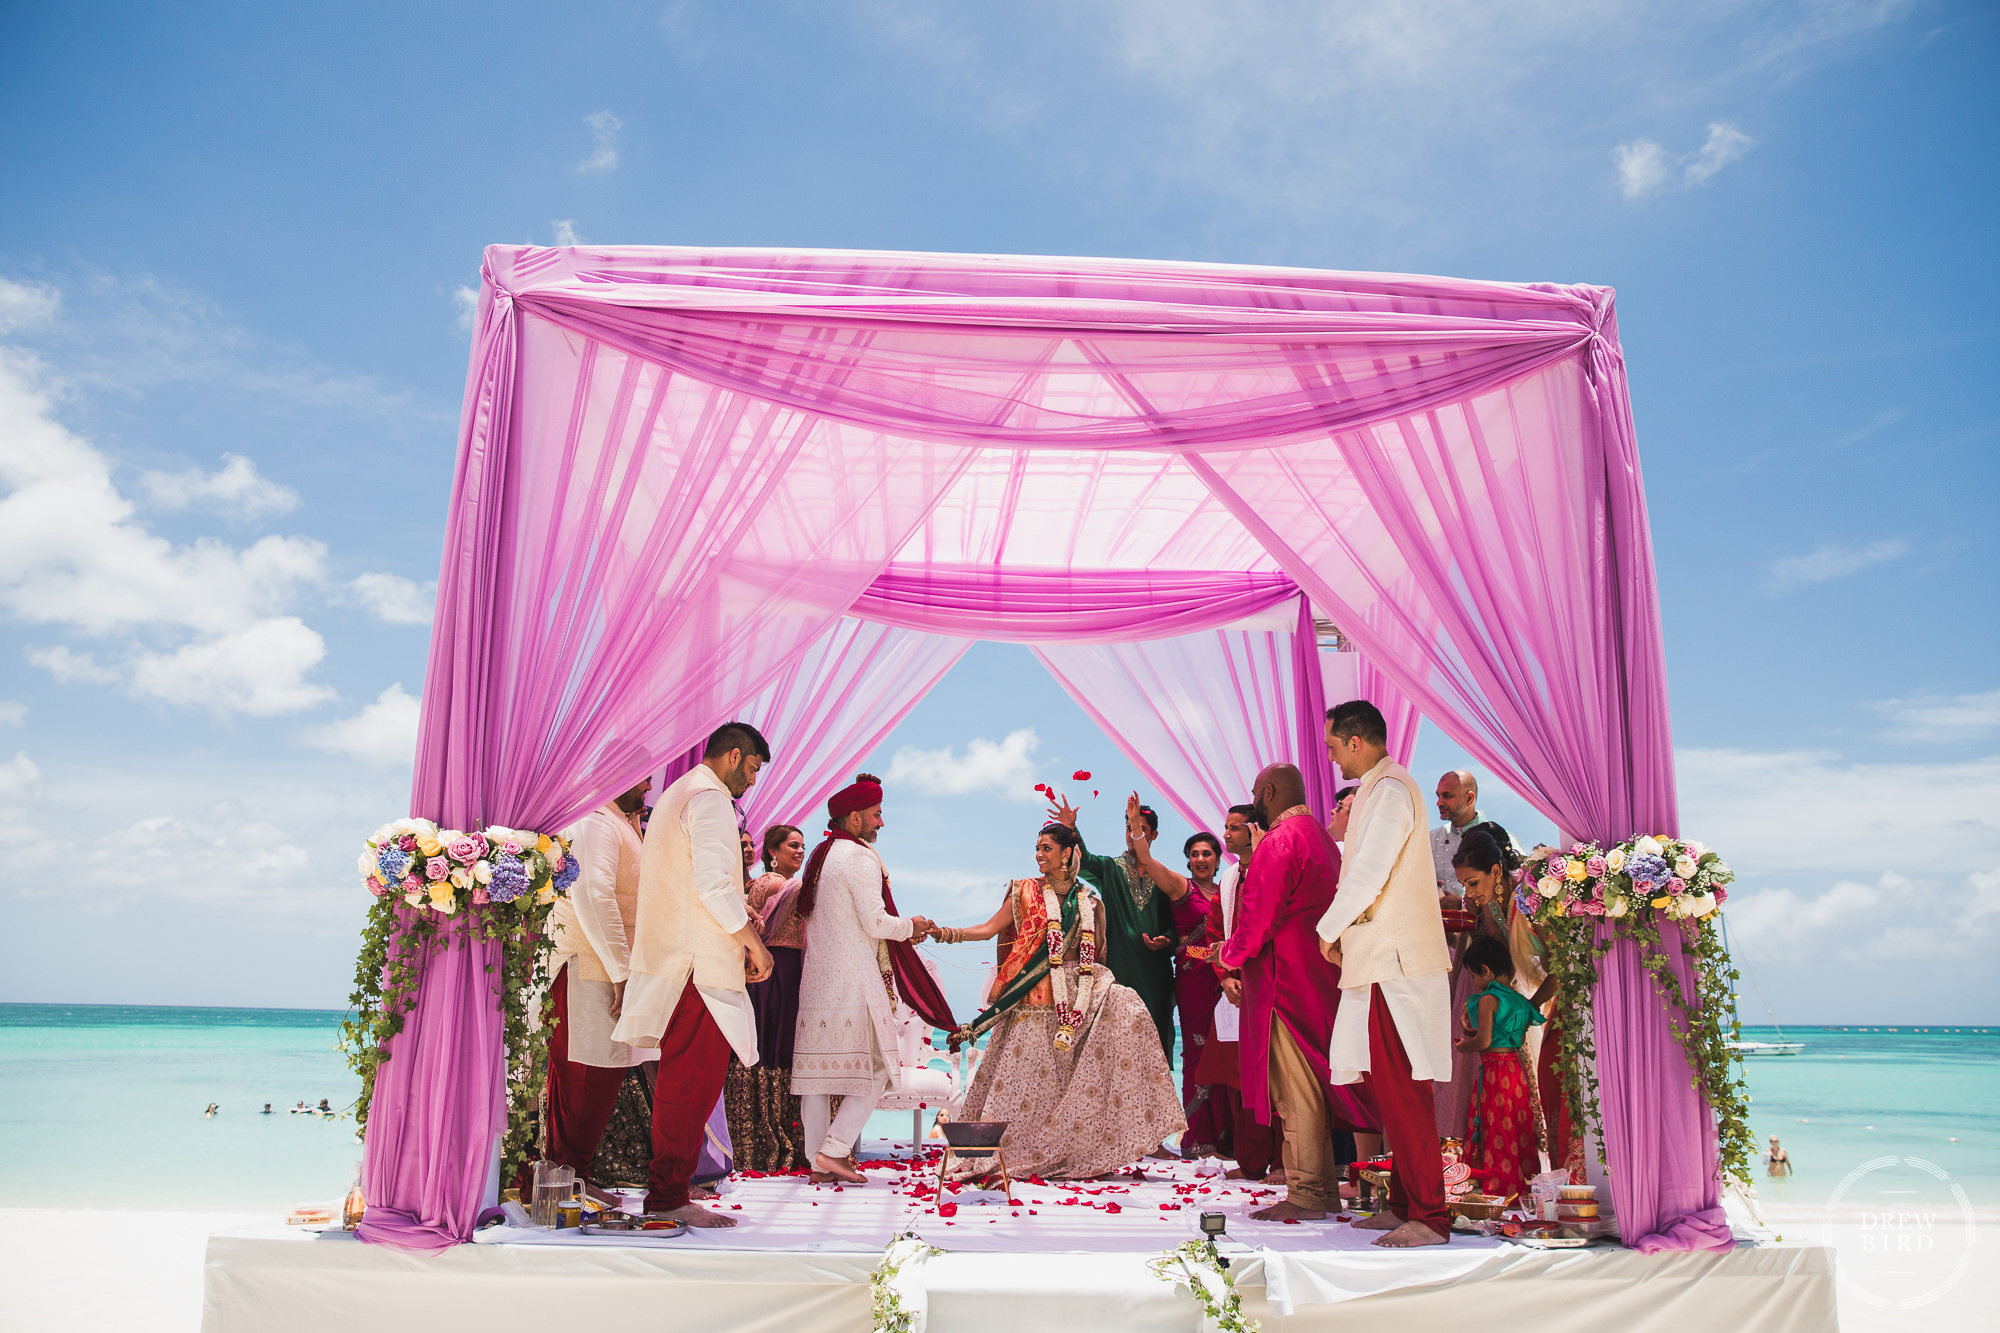 Bride and groom walk under a pink Mandap around a ceremonial fire with blue sky and ocean in the background for a Hindu Indian wedding ceremony on the beach at the Hilton Aruba resort by professional wedding photographer Drew Bird